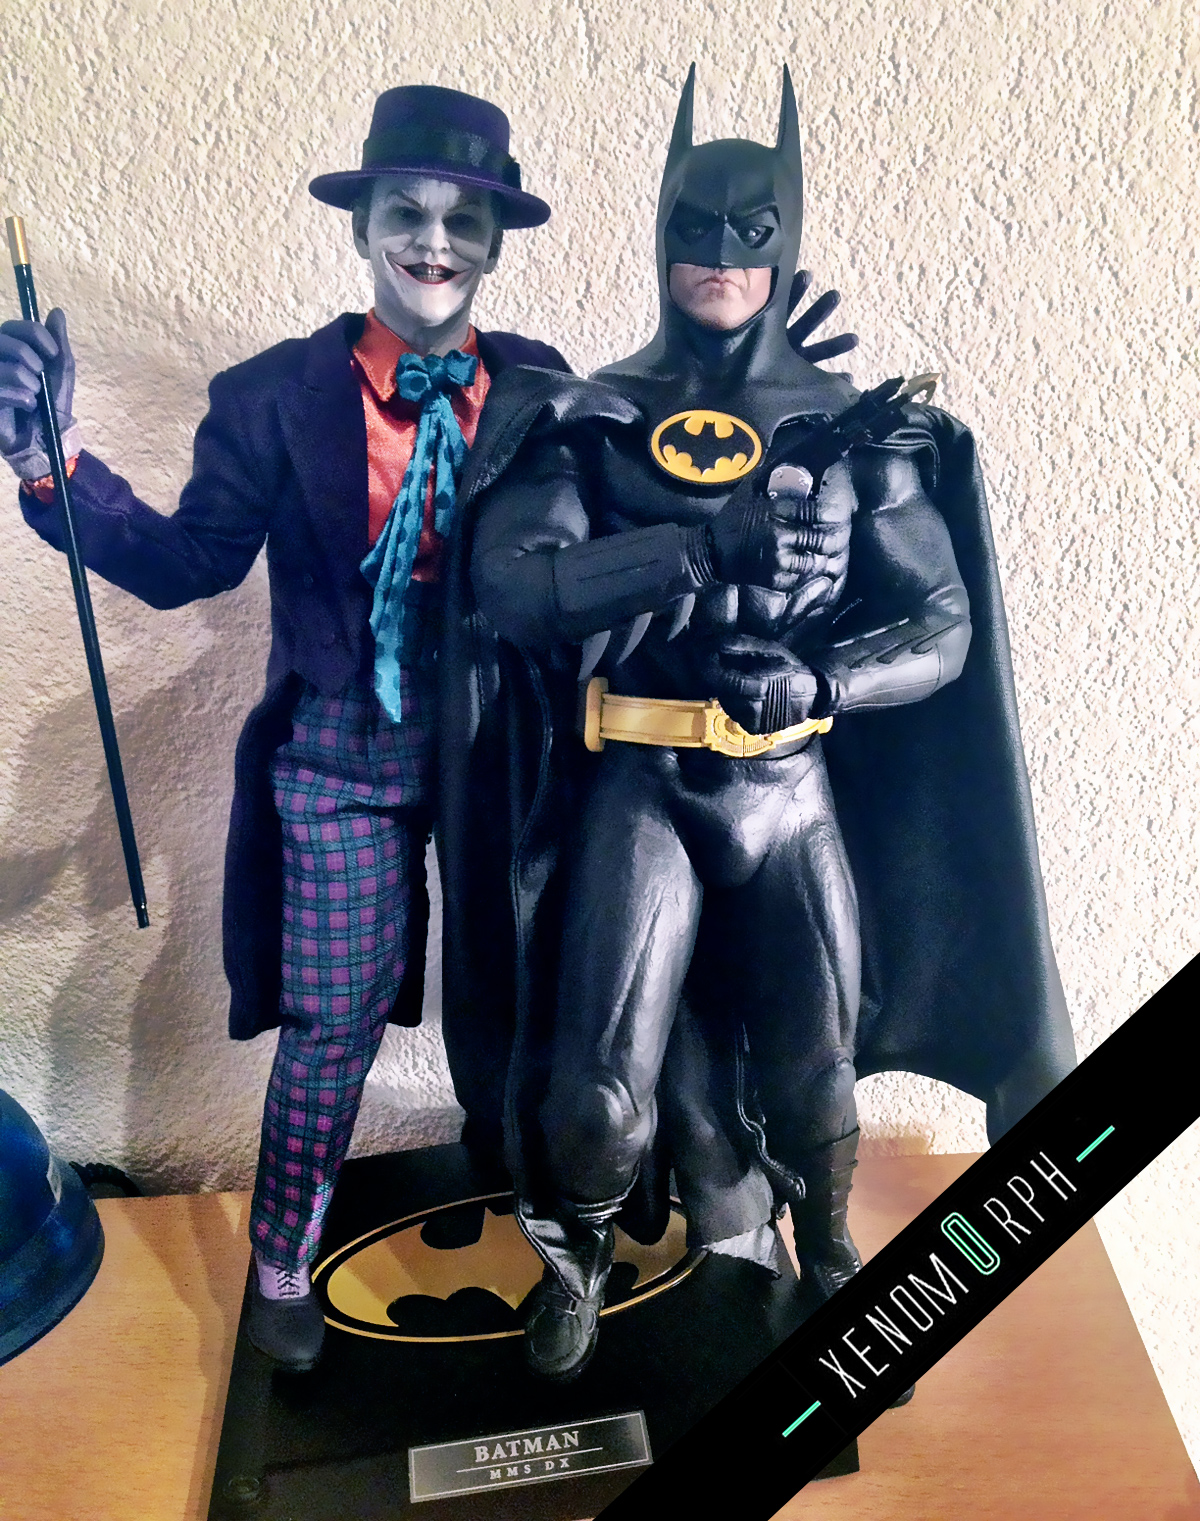 WTB: Hot Toys Batman 1989 Keaton Headsculpt with working PERS - DX09 -  FOUND thx! | Collector Freaks Collectibles Forum